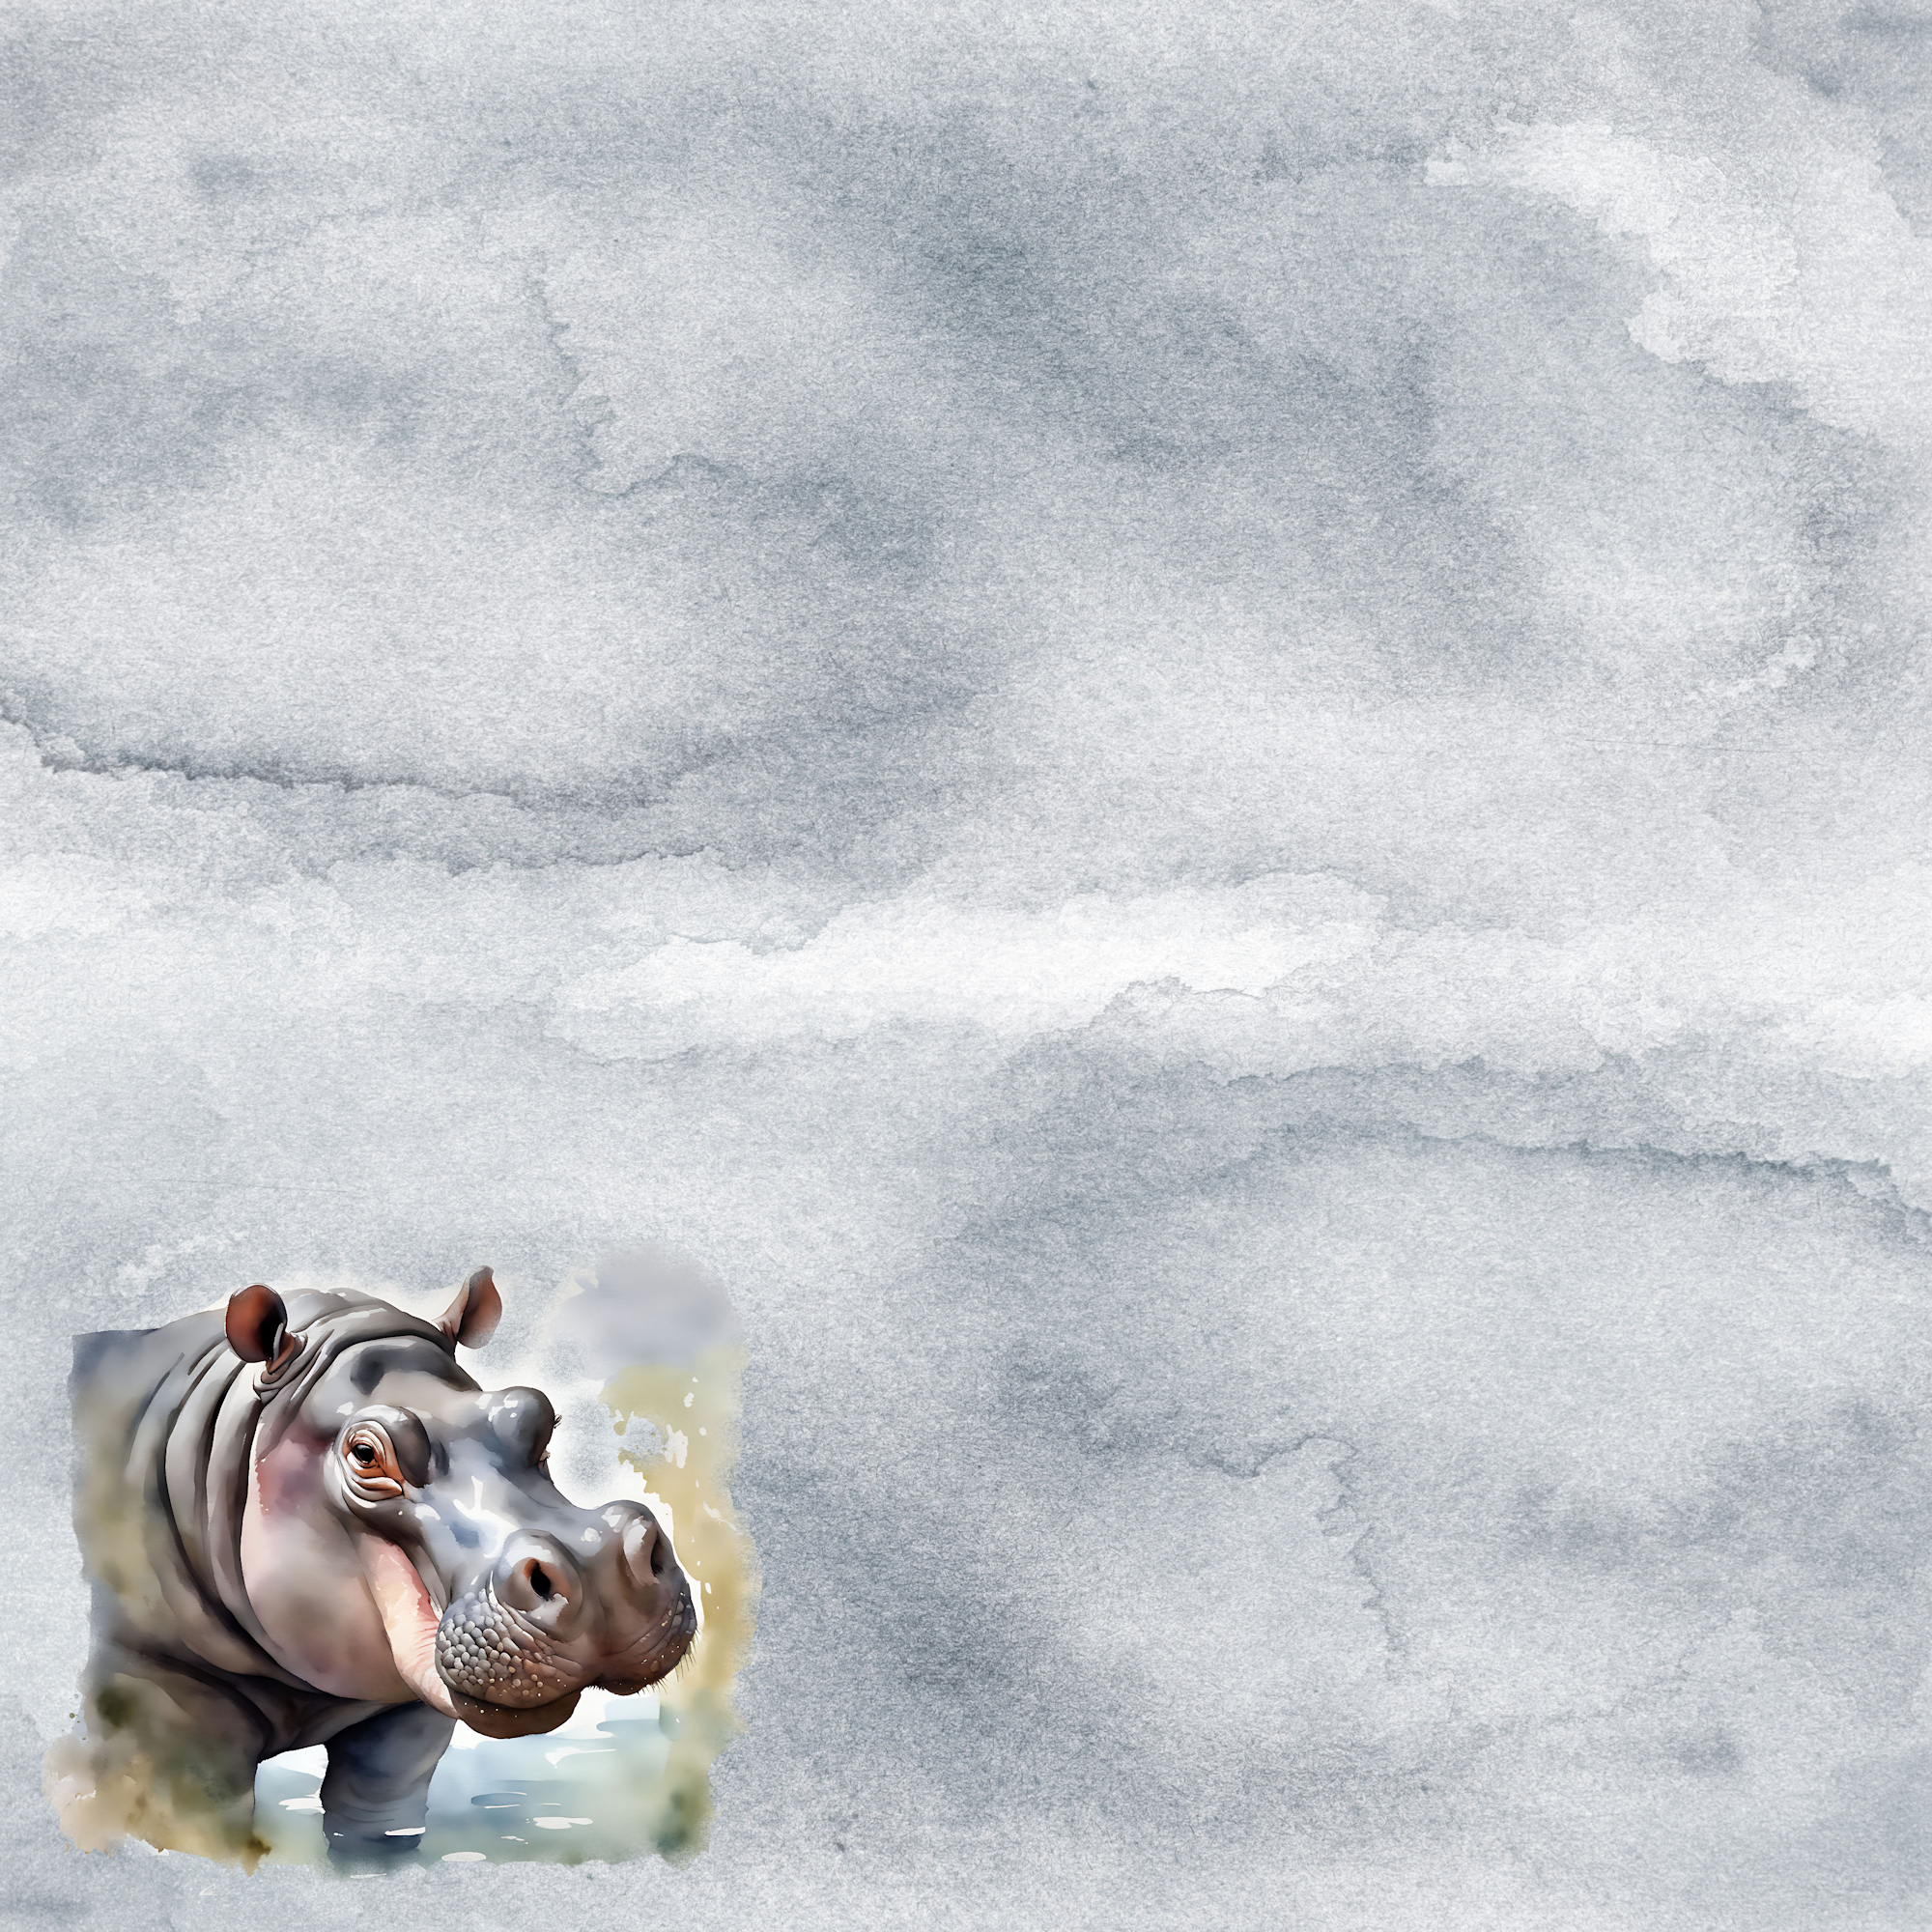 Watercolor Wildlife Collection Hippopotamus 12 x 12 Double-Sided Scrapbook Paper by SSC Designs